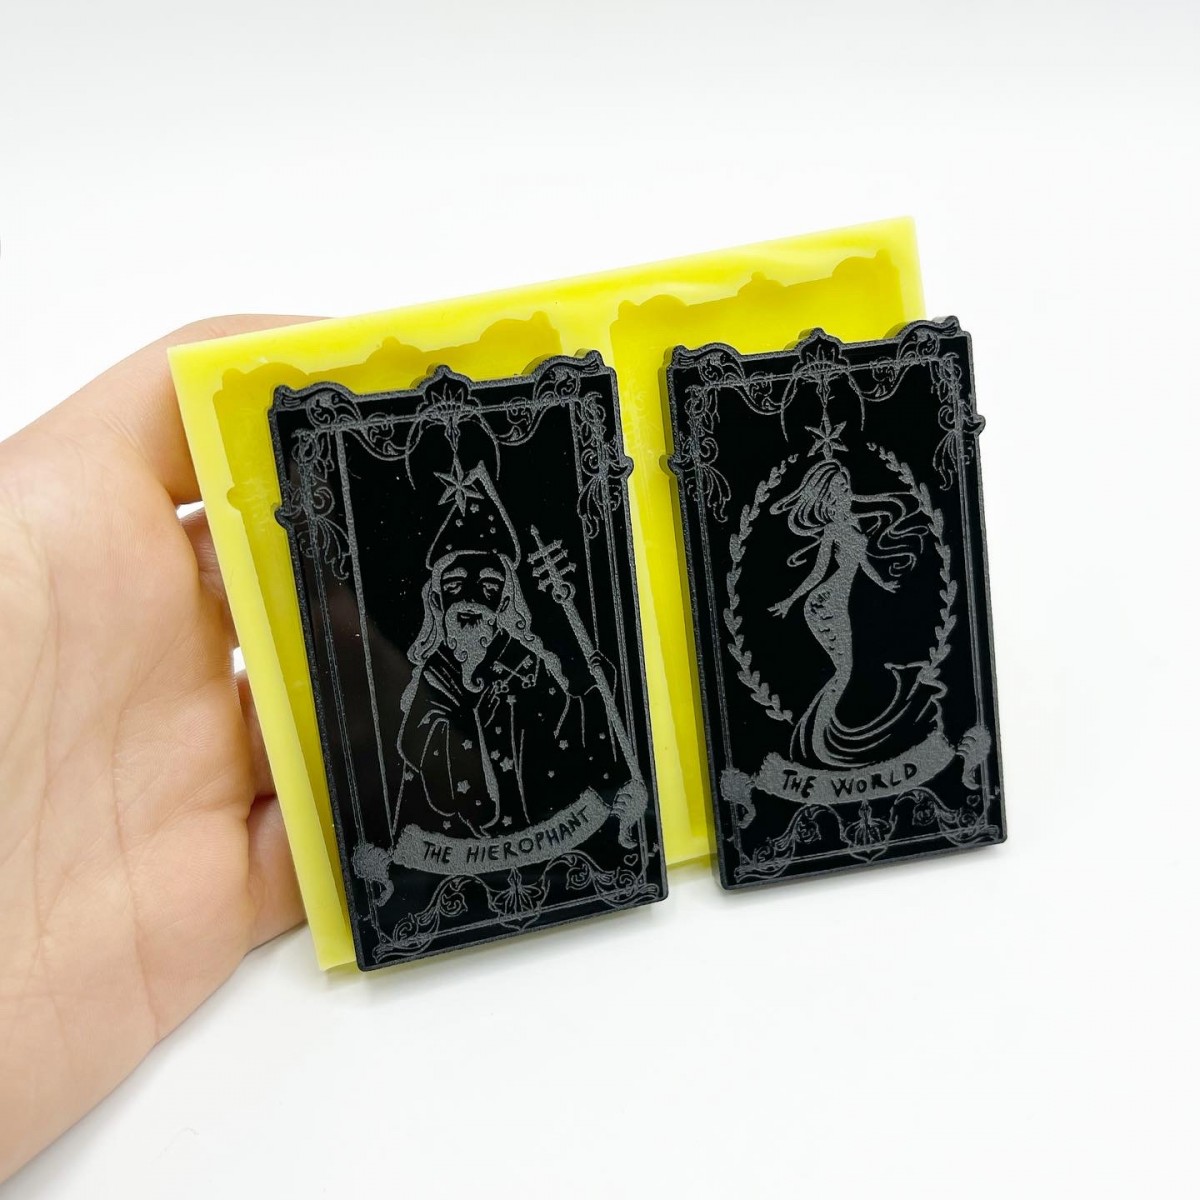 Set of "The World" and "The Hierophant" Tarot Cards Mold - medium size